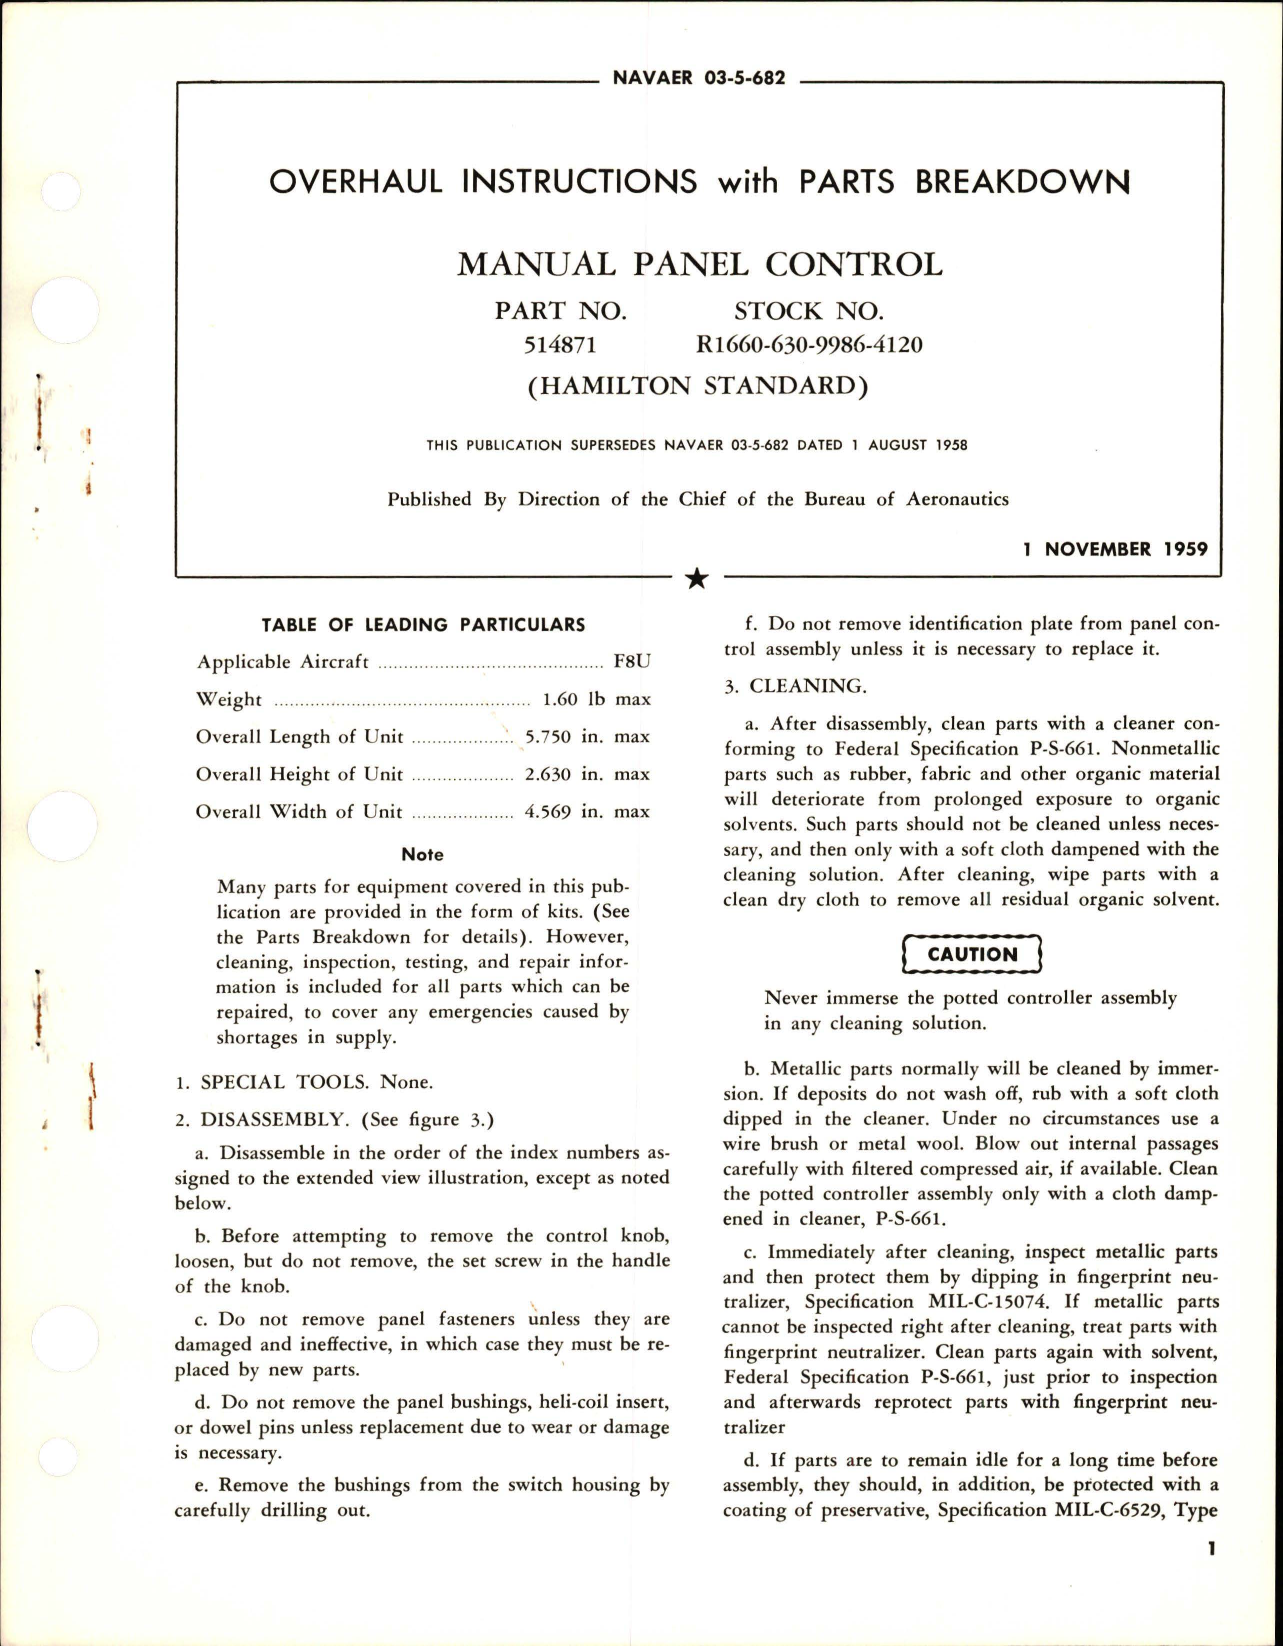 Sample page 1 from AirCorps Library document: Overhaul Instructions with Parts Breakdown for Manual Panel Control - Part 514871